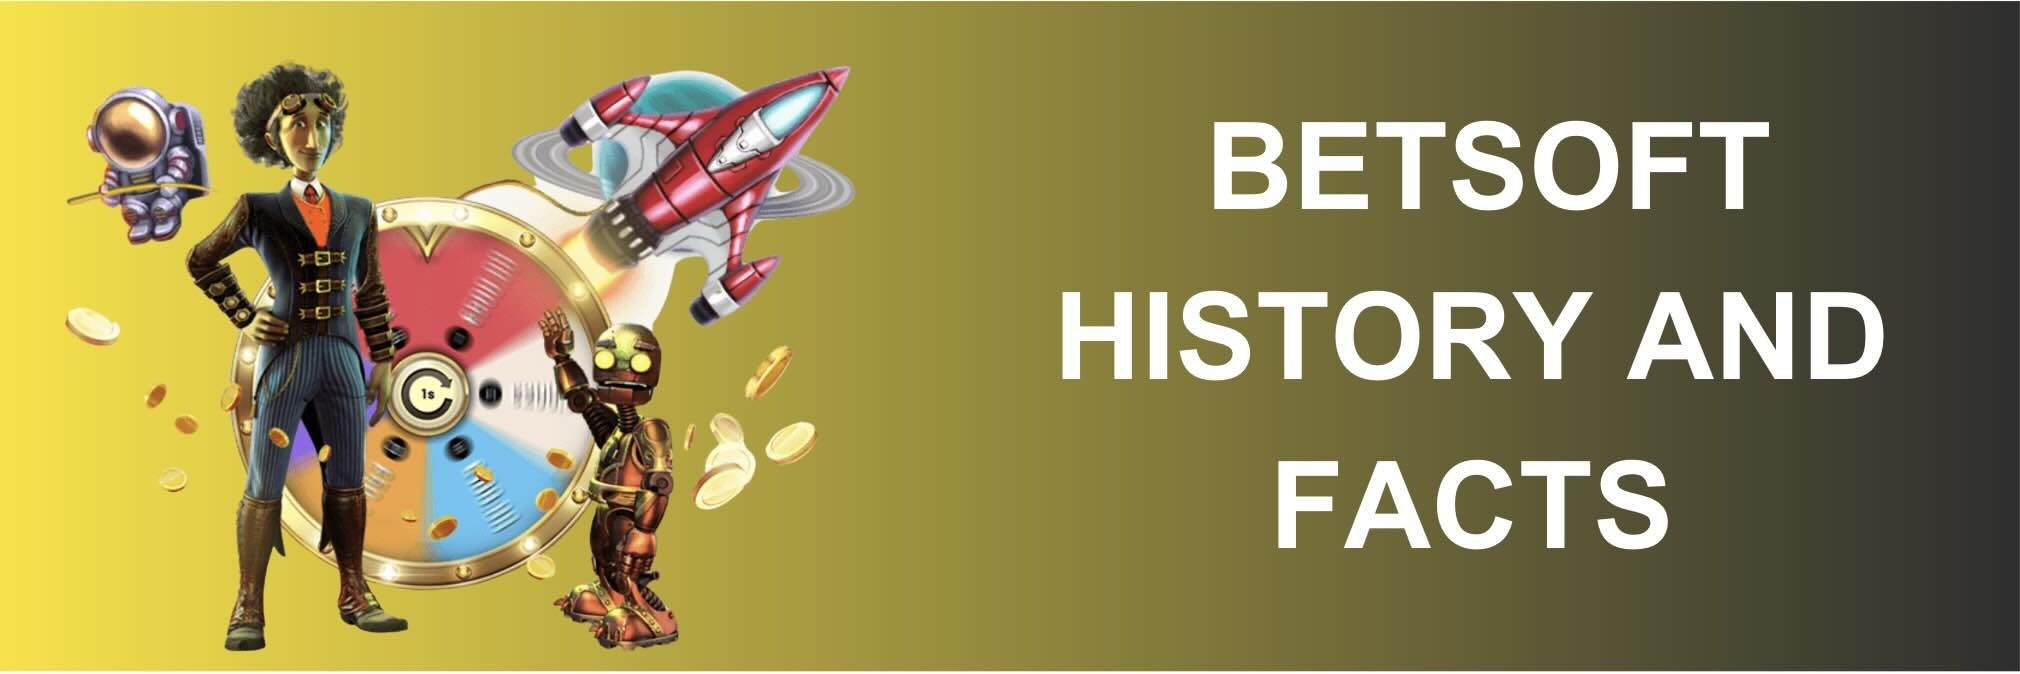 Image of Betsoft History and Facts